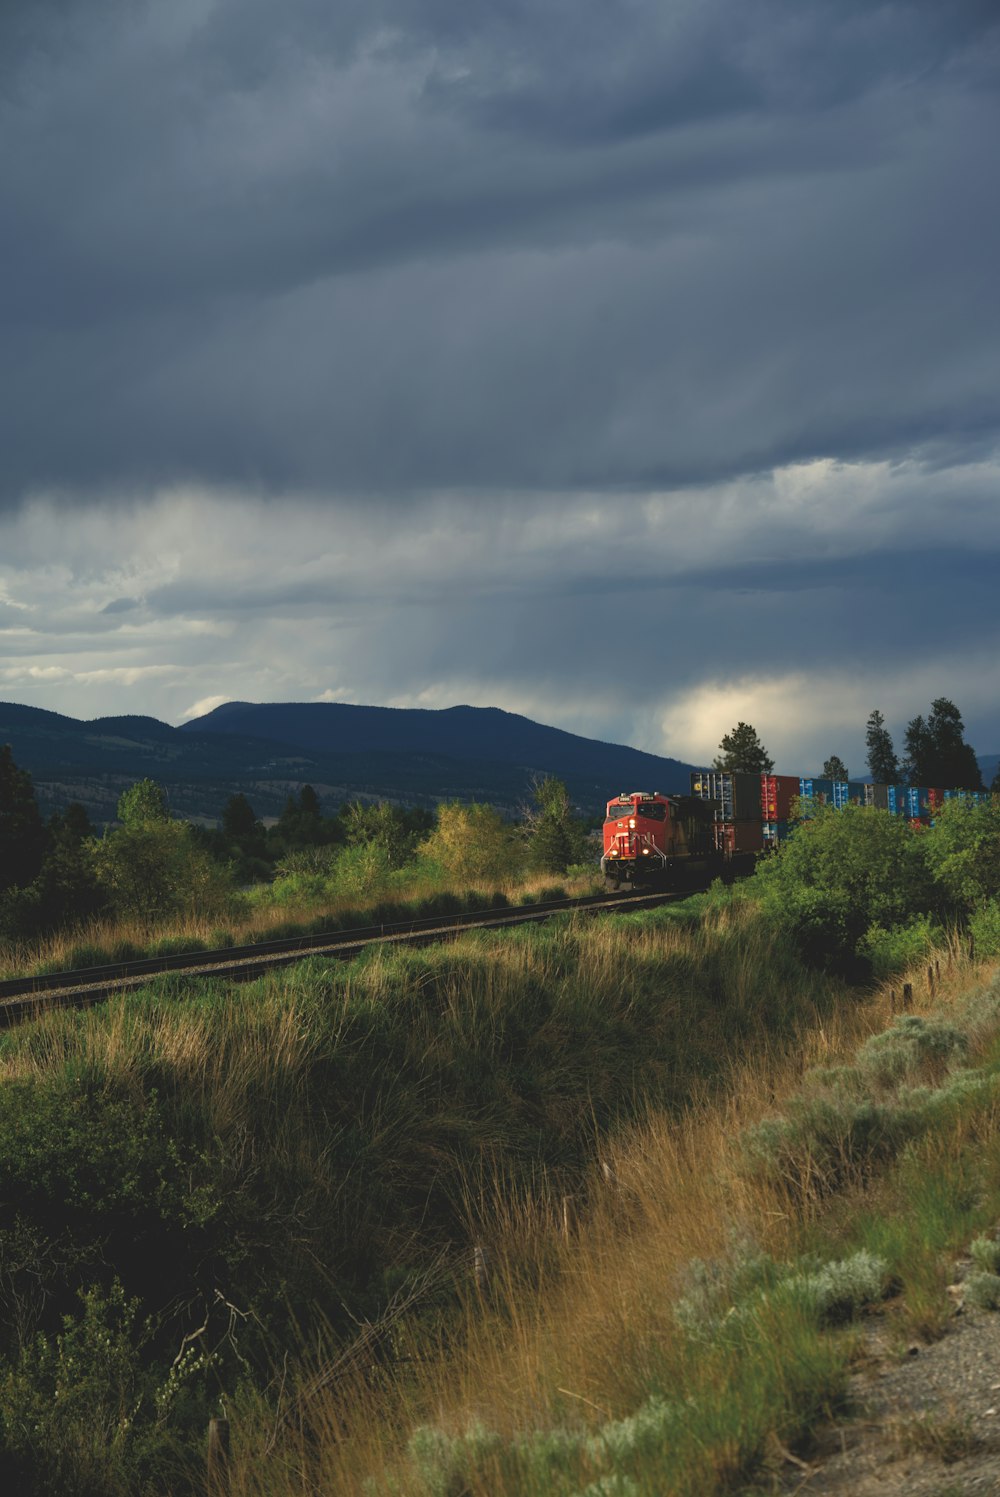 red train on rail road near green grass field under cloudy sky during daytime